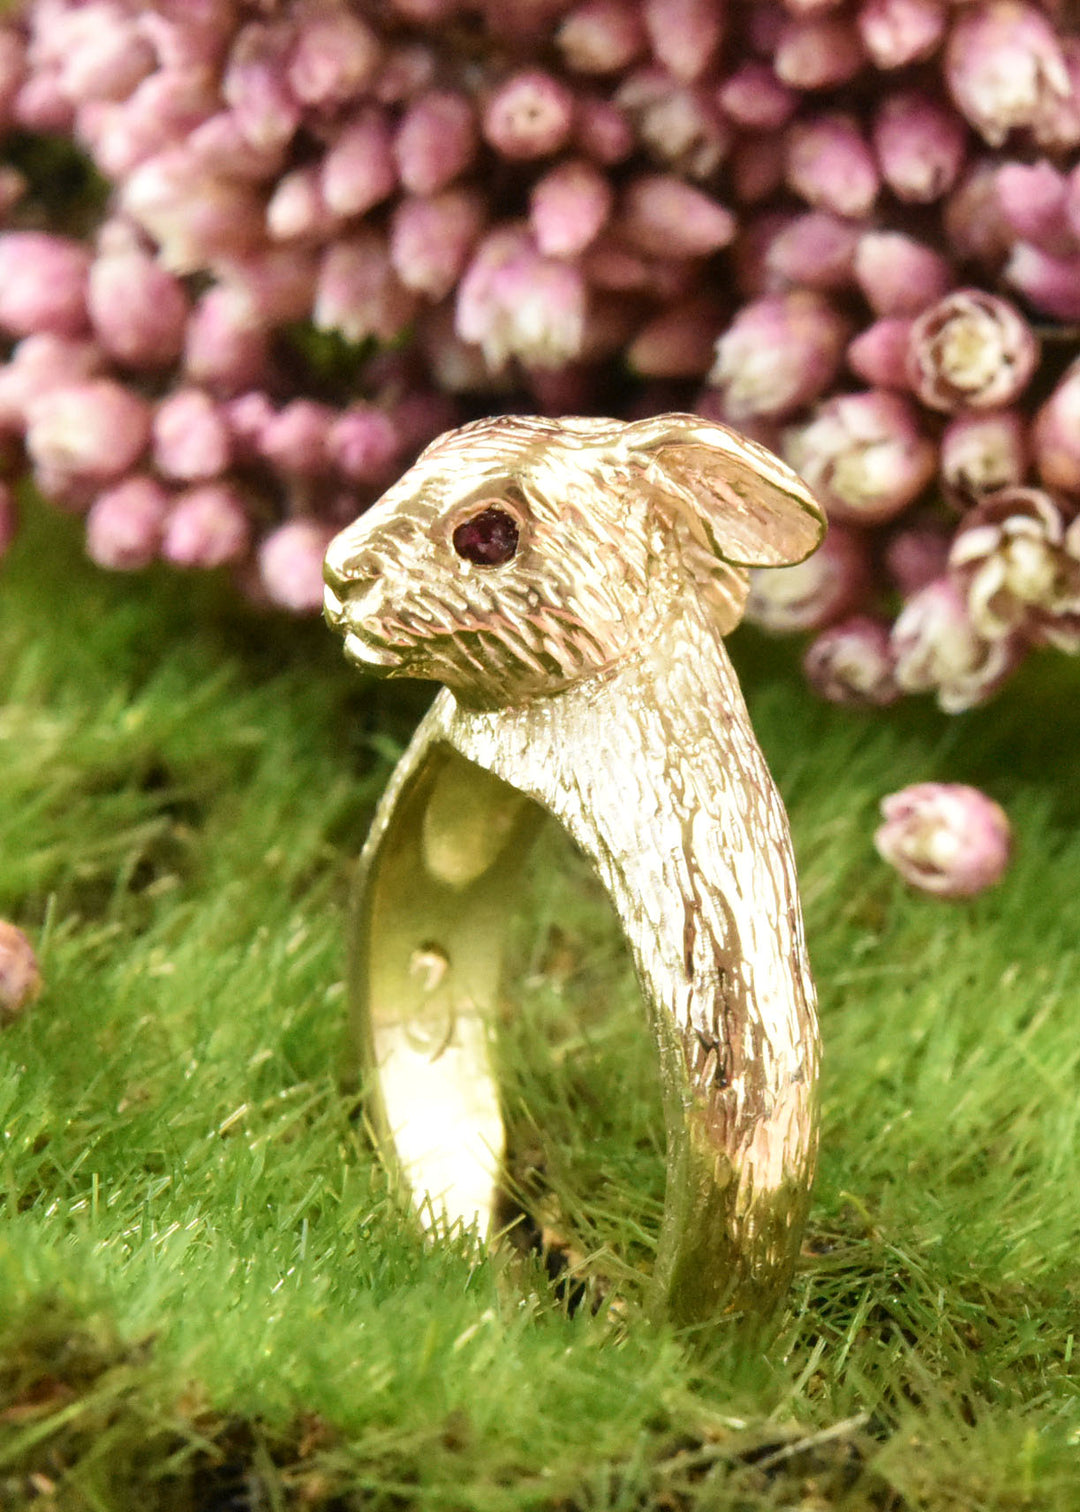 Golden Wild Rabbit Ring in Gold with Rubies - Goldmakers Fine Jewelry